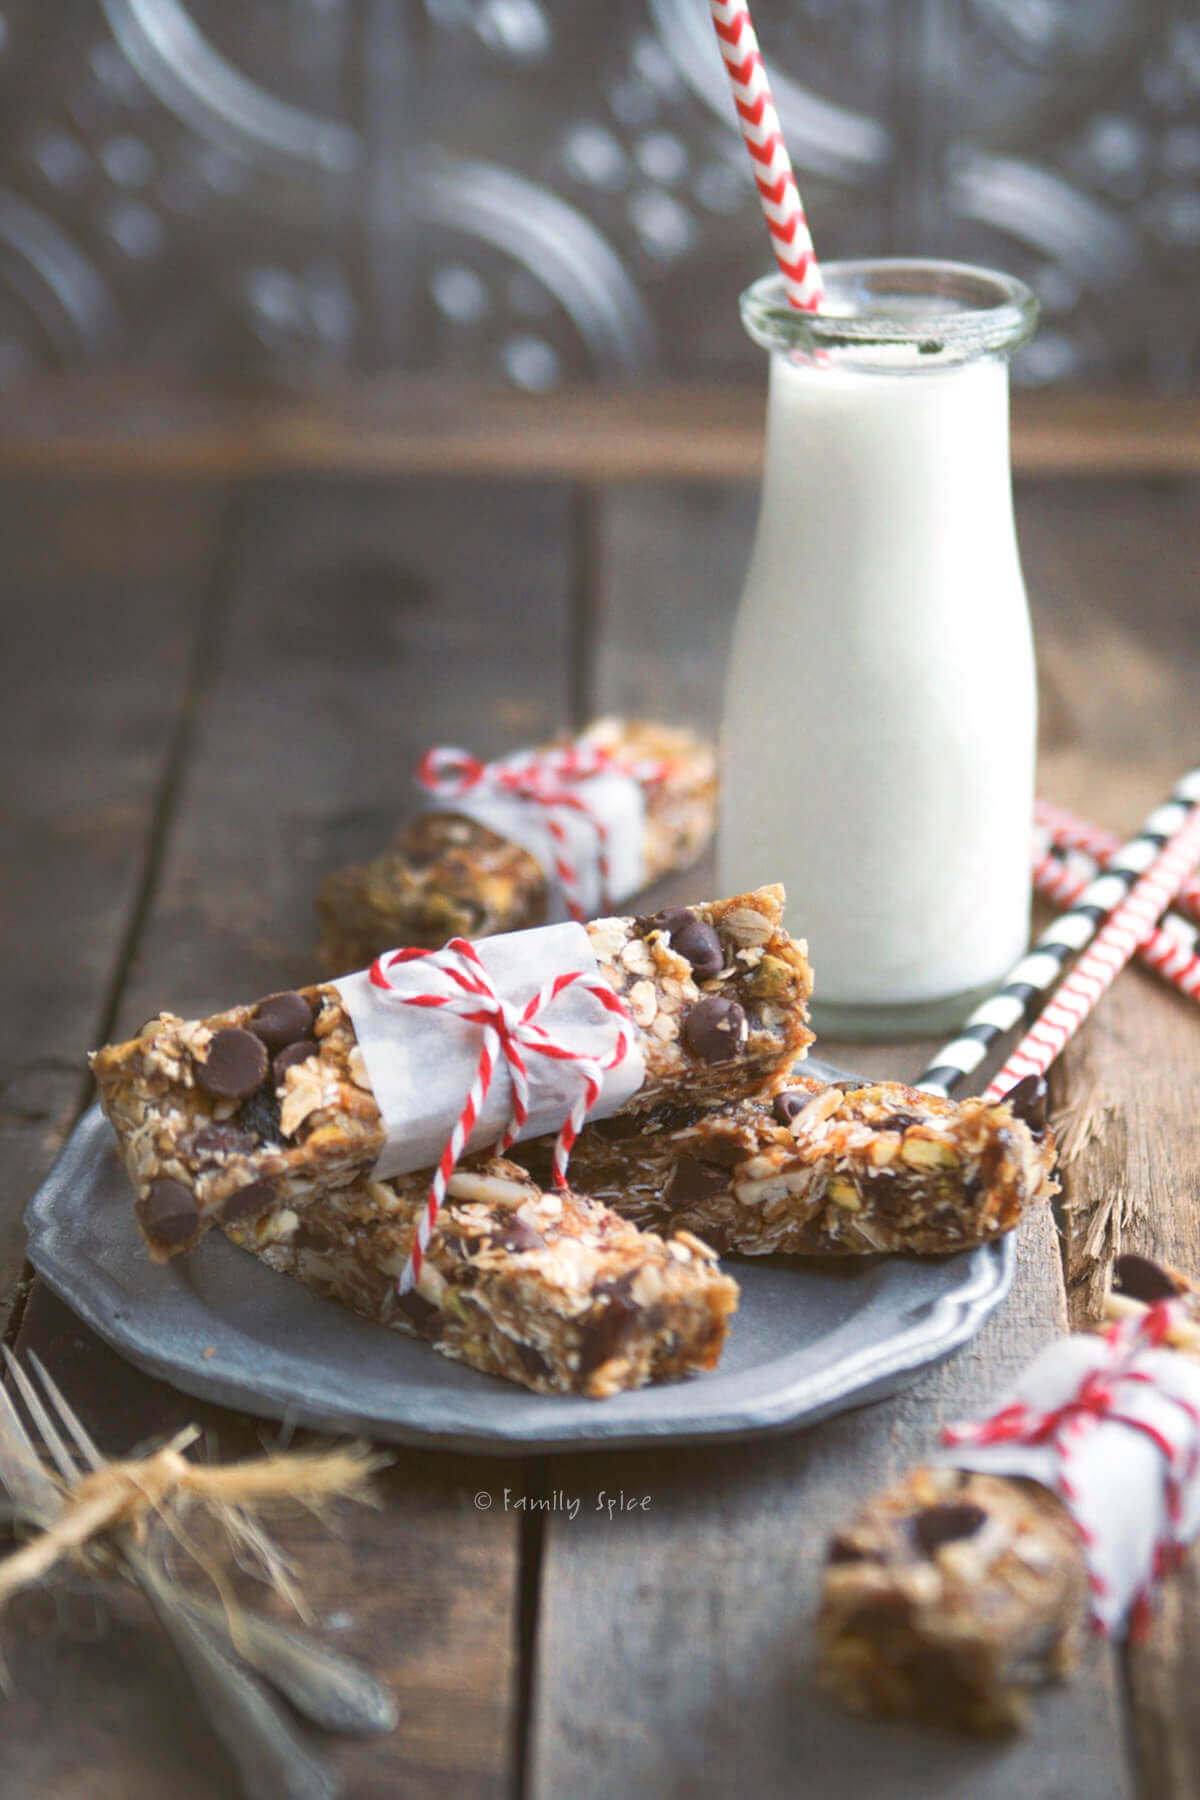 Oatmeal date nut bars wrapped in a strip of parchment paper and tied with bakers twine with a glass bottle of milk next to it